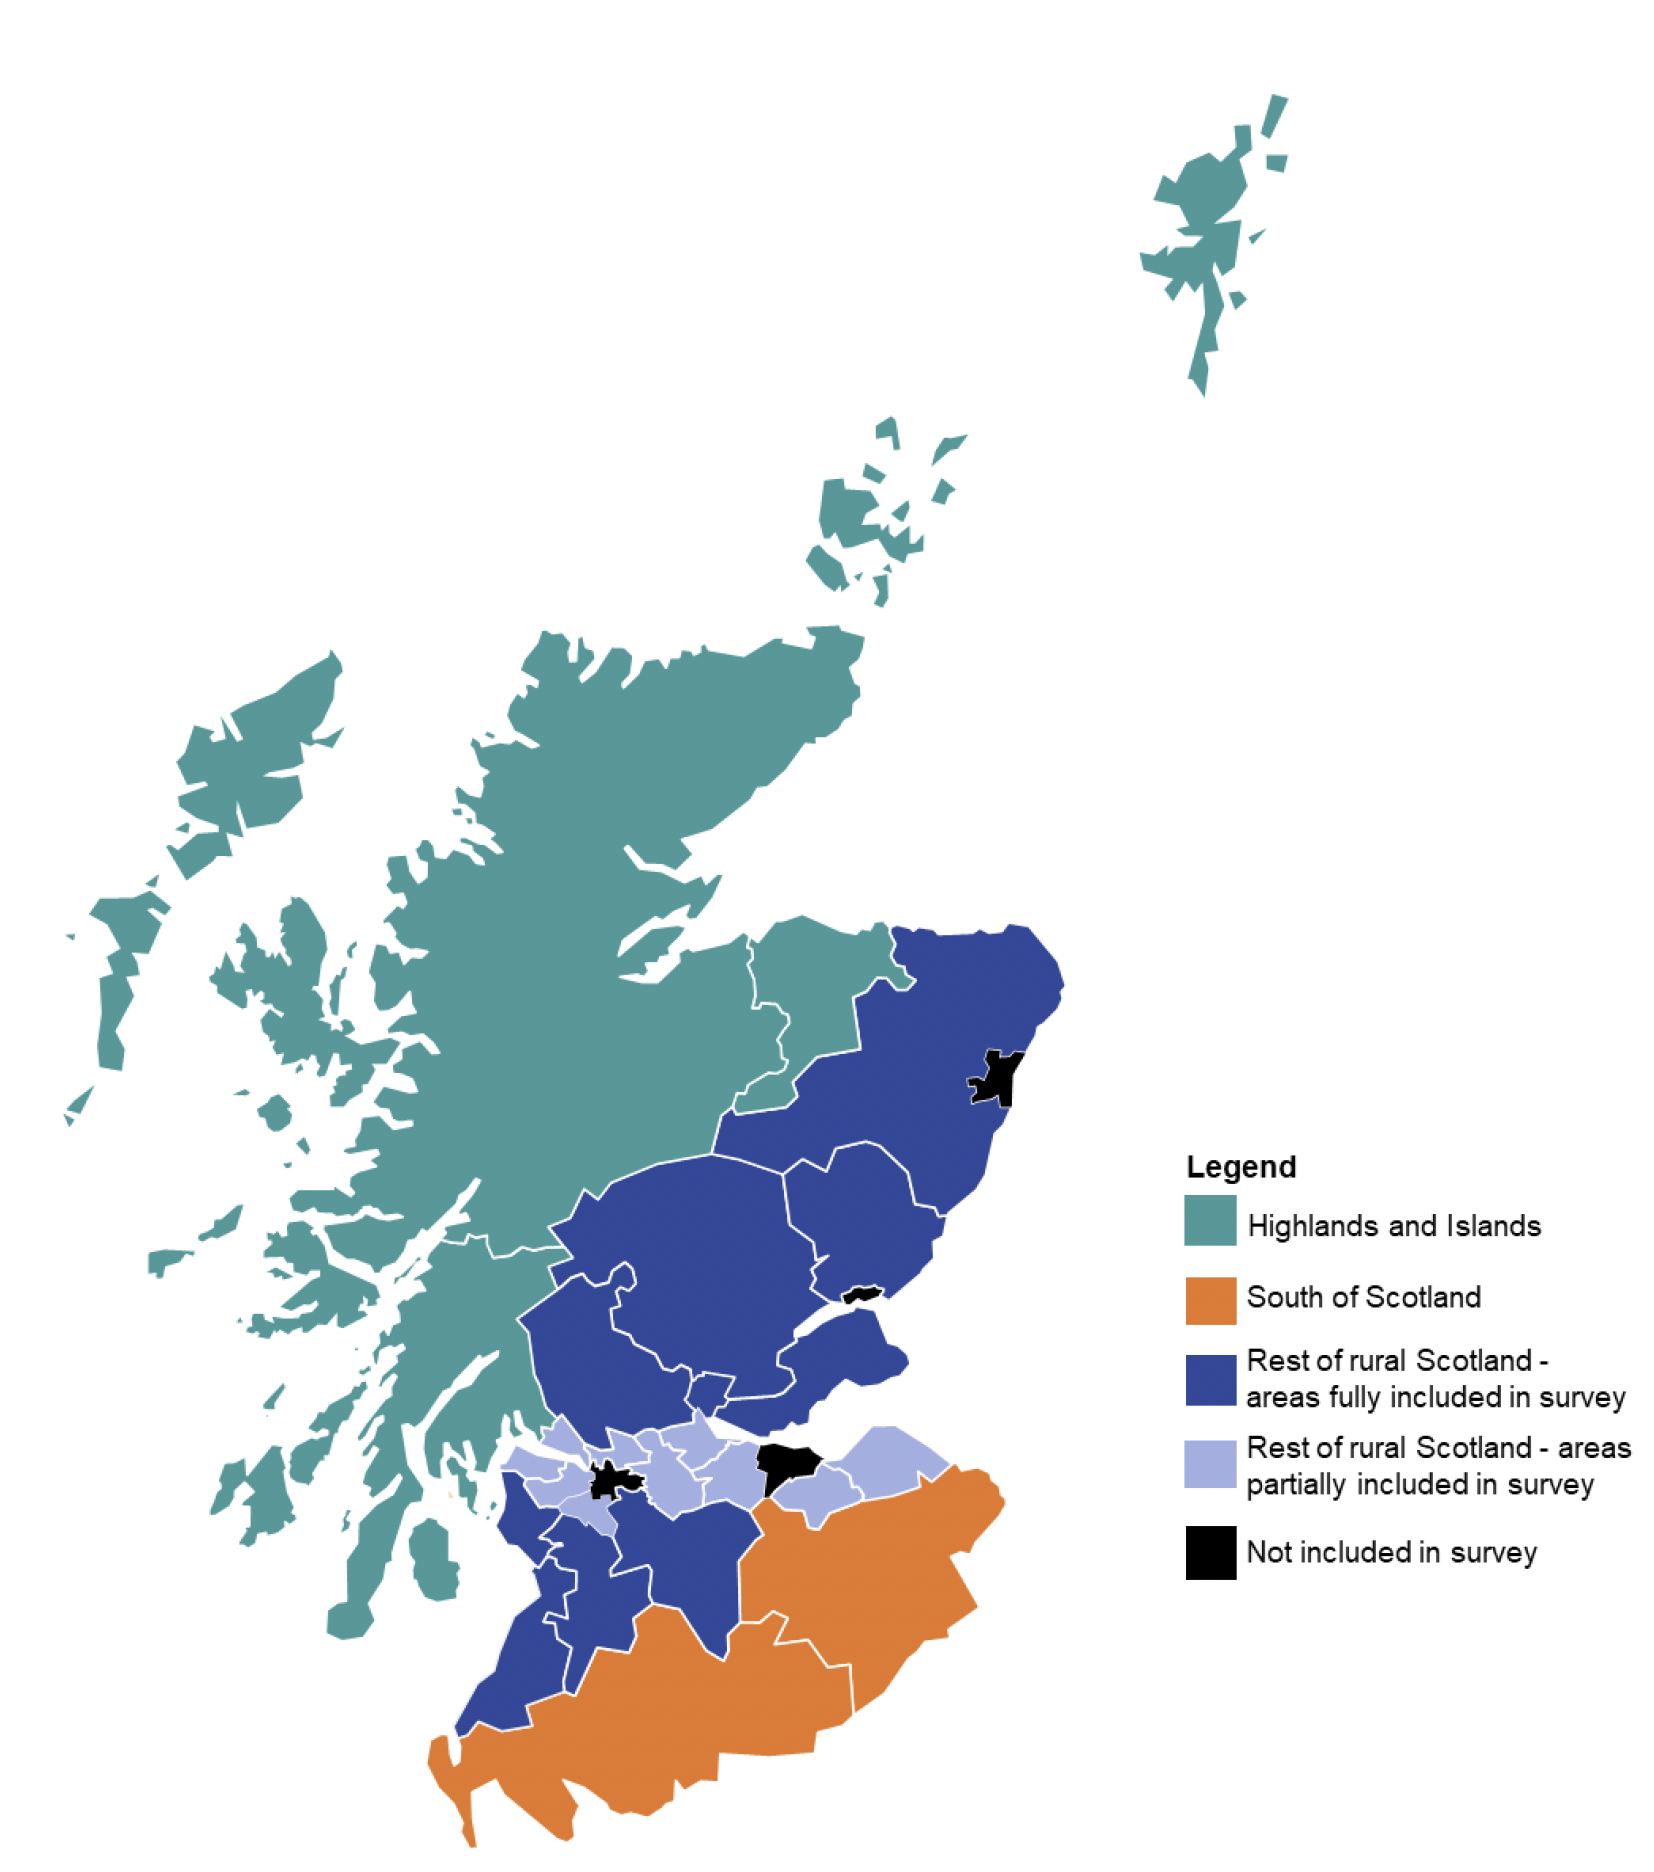 Map showing areas of Scotland covered by survey, including Highlands and Islands, South of Scotland, and some areas in rest of rural Scotland